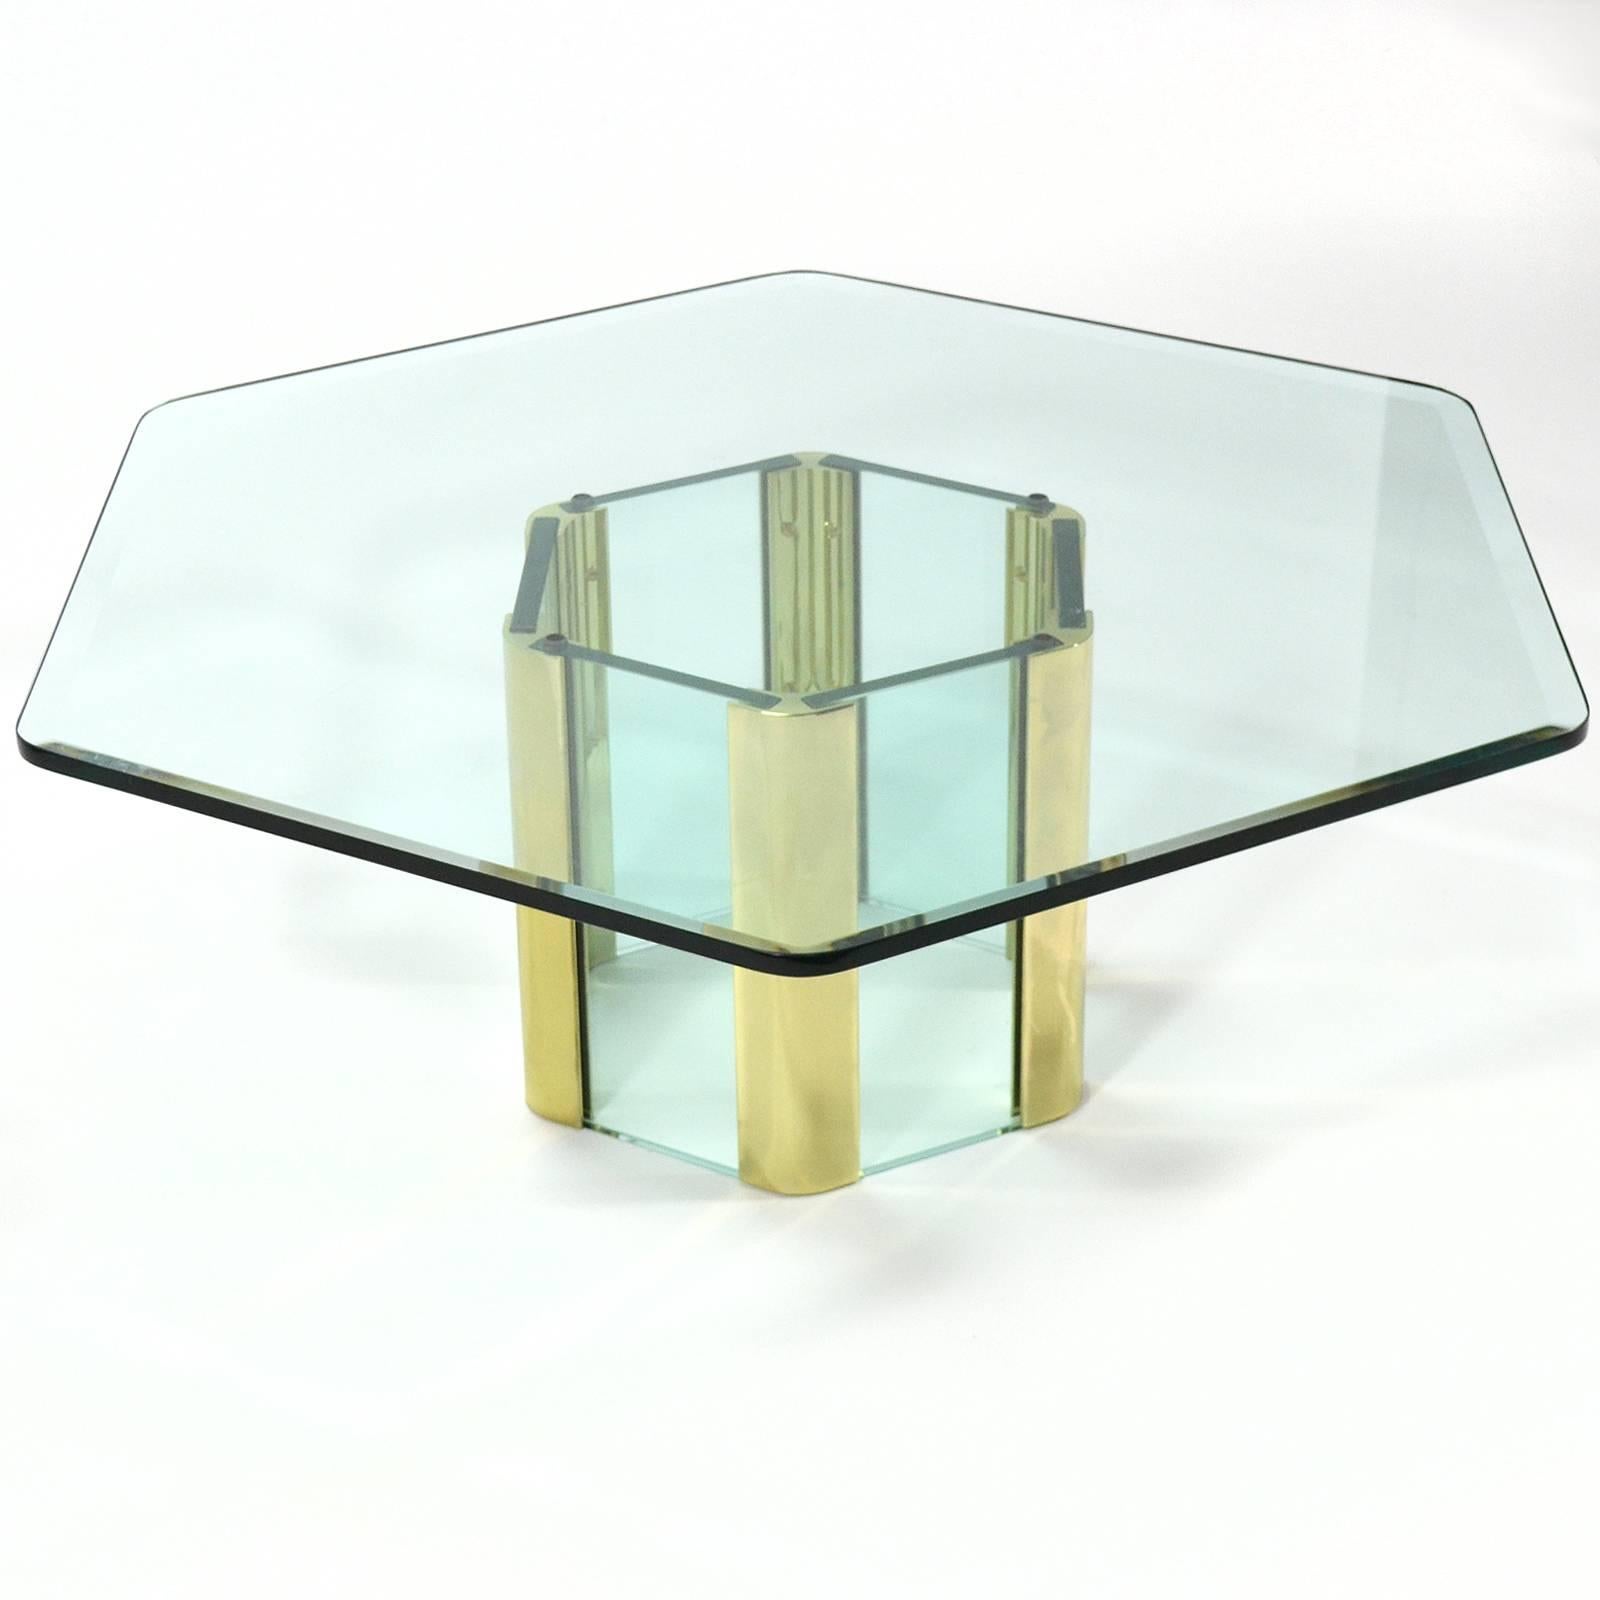 Brass Pace Coffee Table with Hexagonal Designed by Leon Rosen